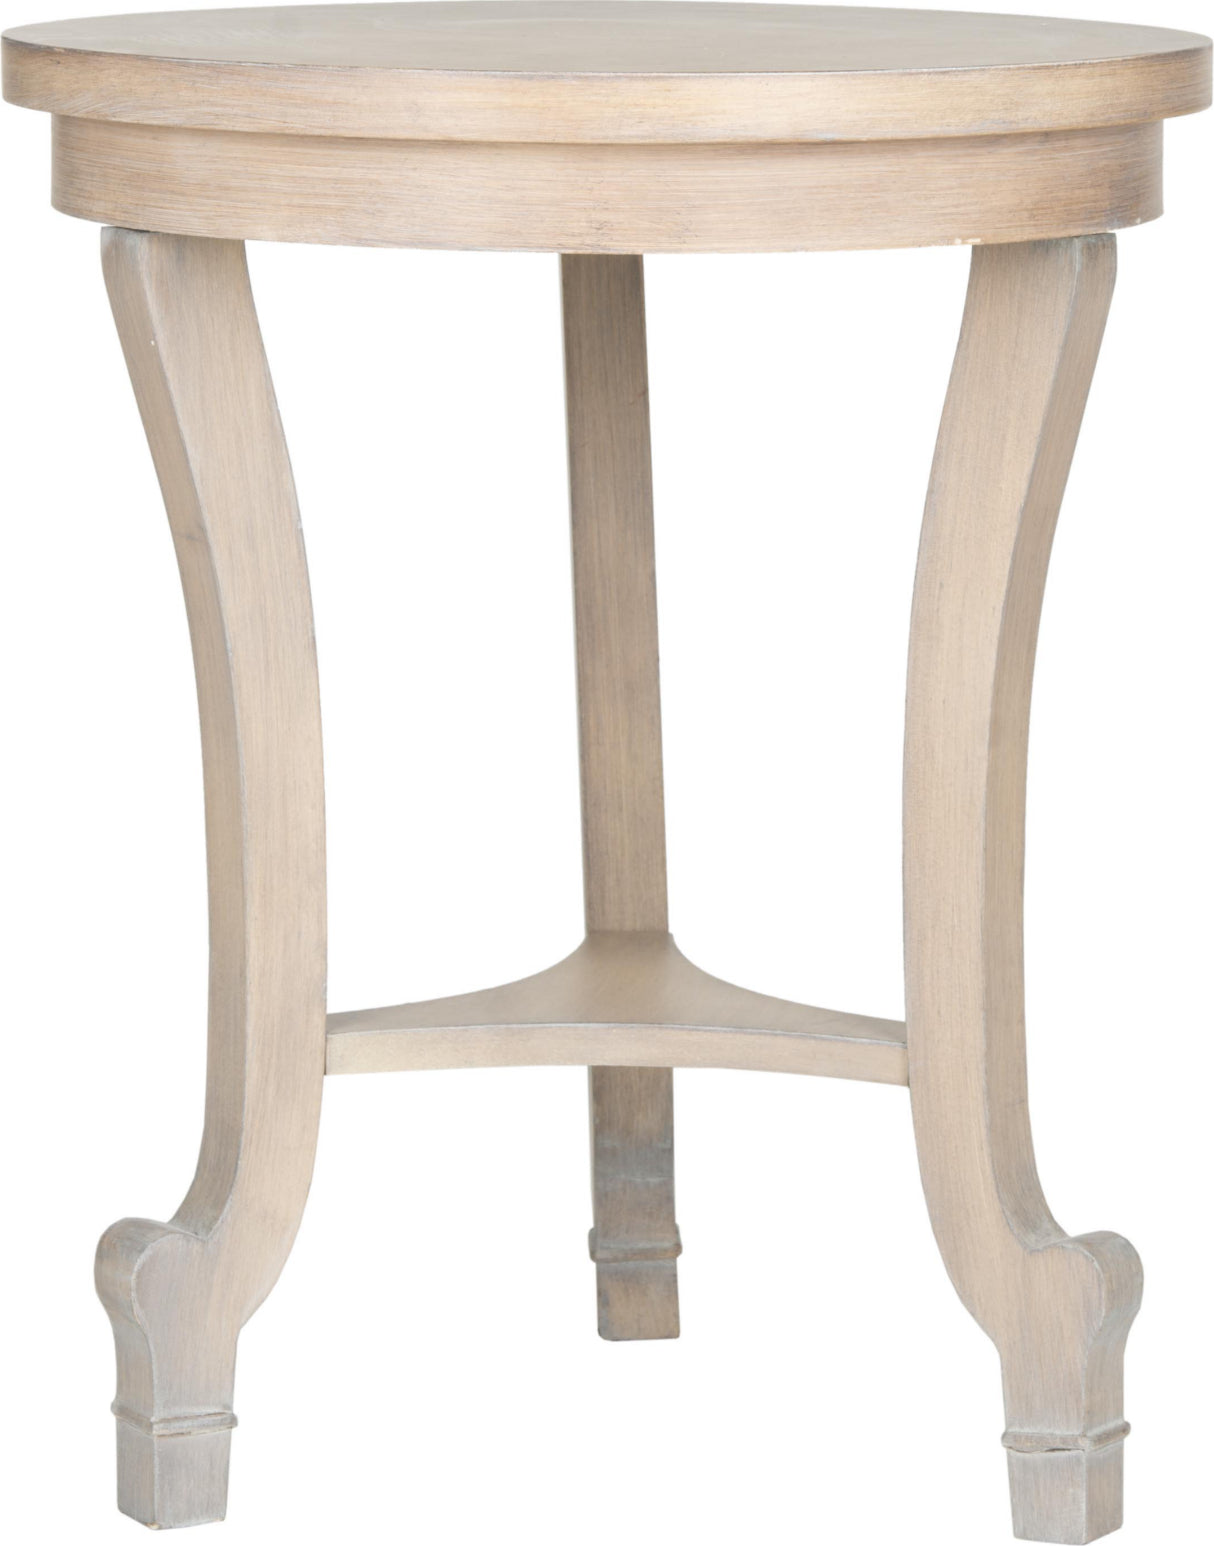 Safavieh Monty Round Top End Table Natural Furniture main image